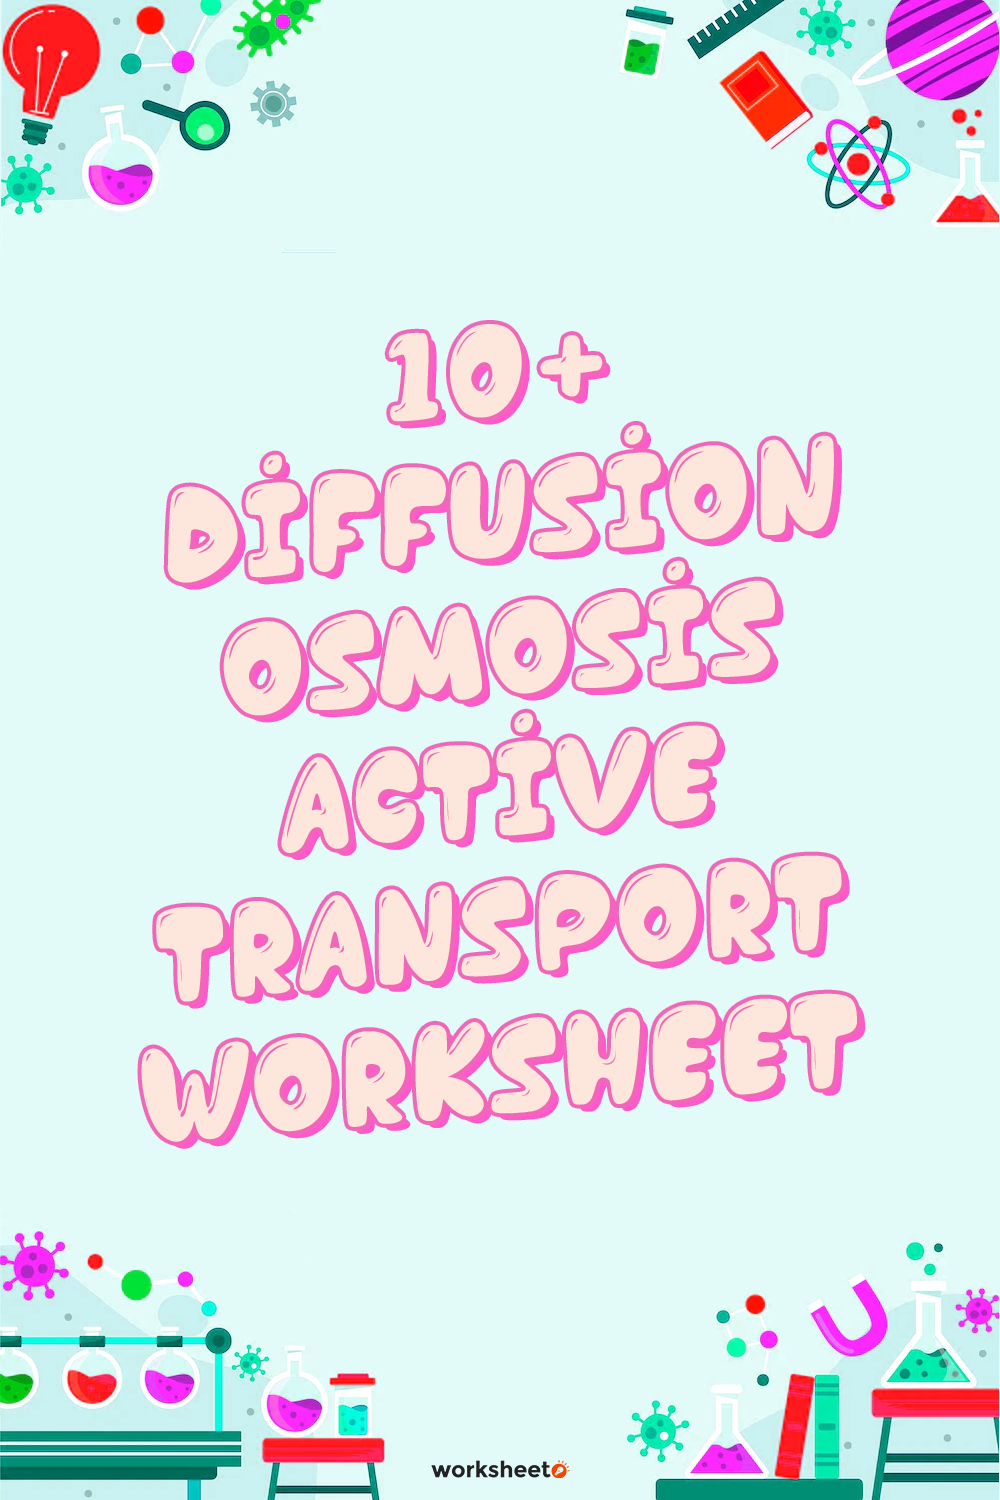 16 Images of Diffusion Osmosis Active Transport Worksheet